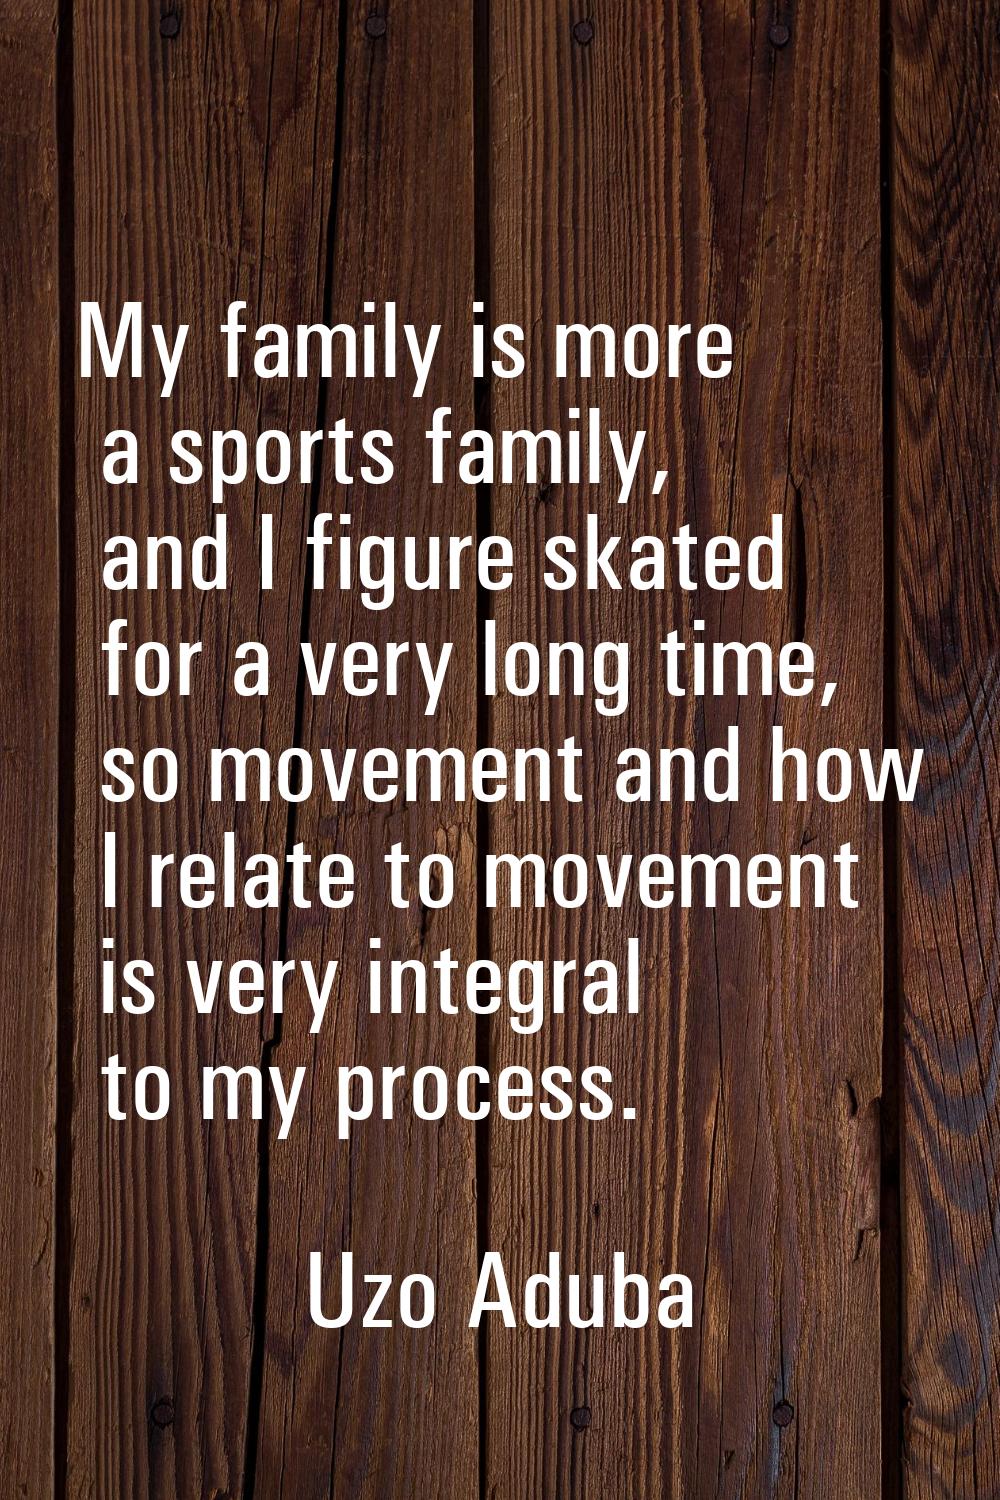 My family is more a sports family, and I figure skated for a very long time, so movement and how I 